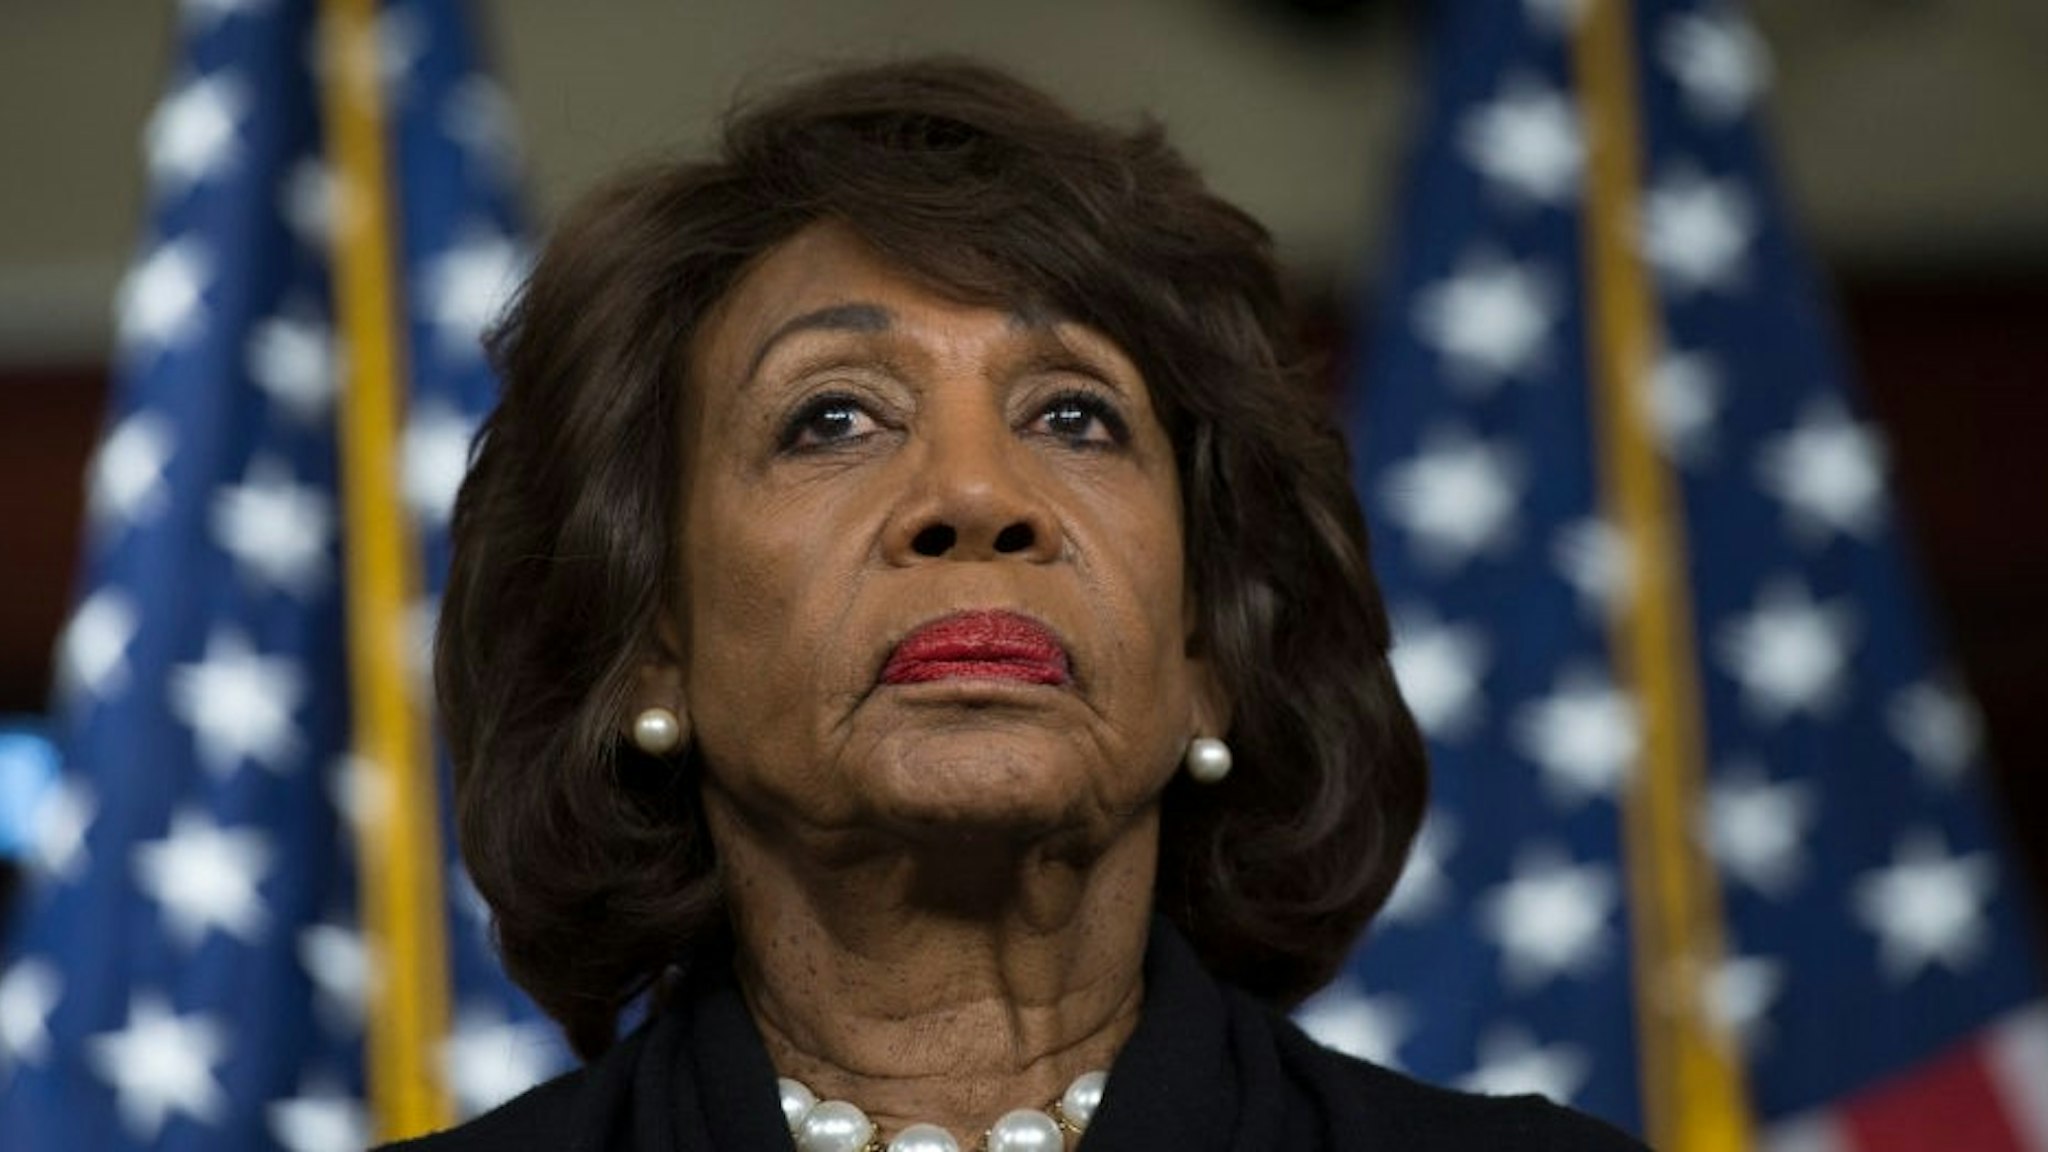 US Representative Maxine Waters (D-CA) looks on before speaking to reports regarding the Russia investigation on Capitol Hill in Washington, DC on January 9, 2018. (Photo by Andrew CABALLERO-REYNOLDS / AFP) (Photo by